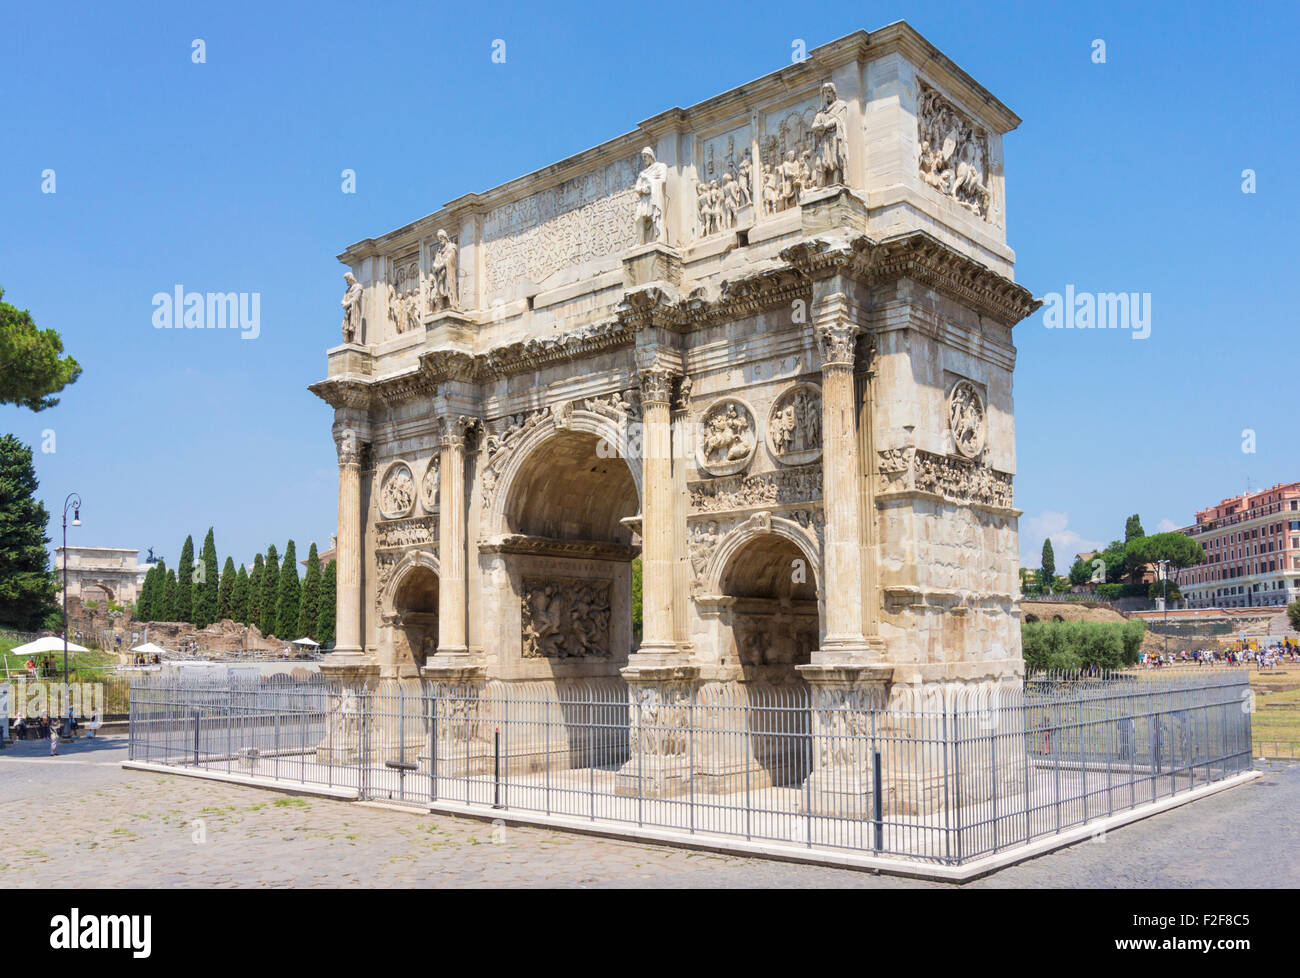 The Arch of Constantine built in AD315 is a triumphal arch spanning the Via Triumphalis Rome Italy Lazio region EU Europe Stock Photo